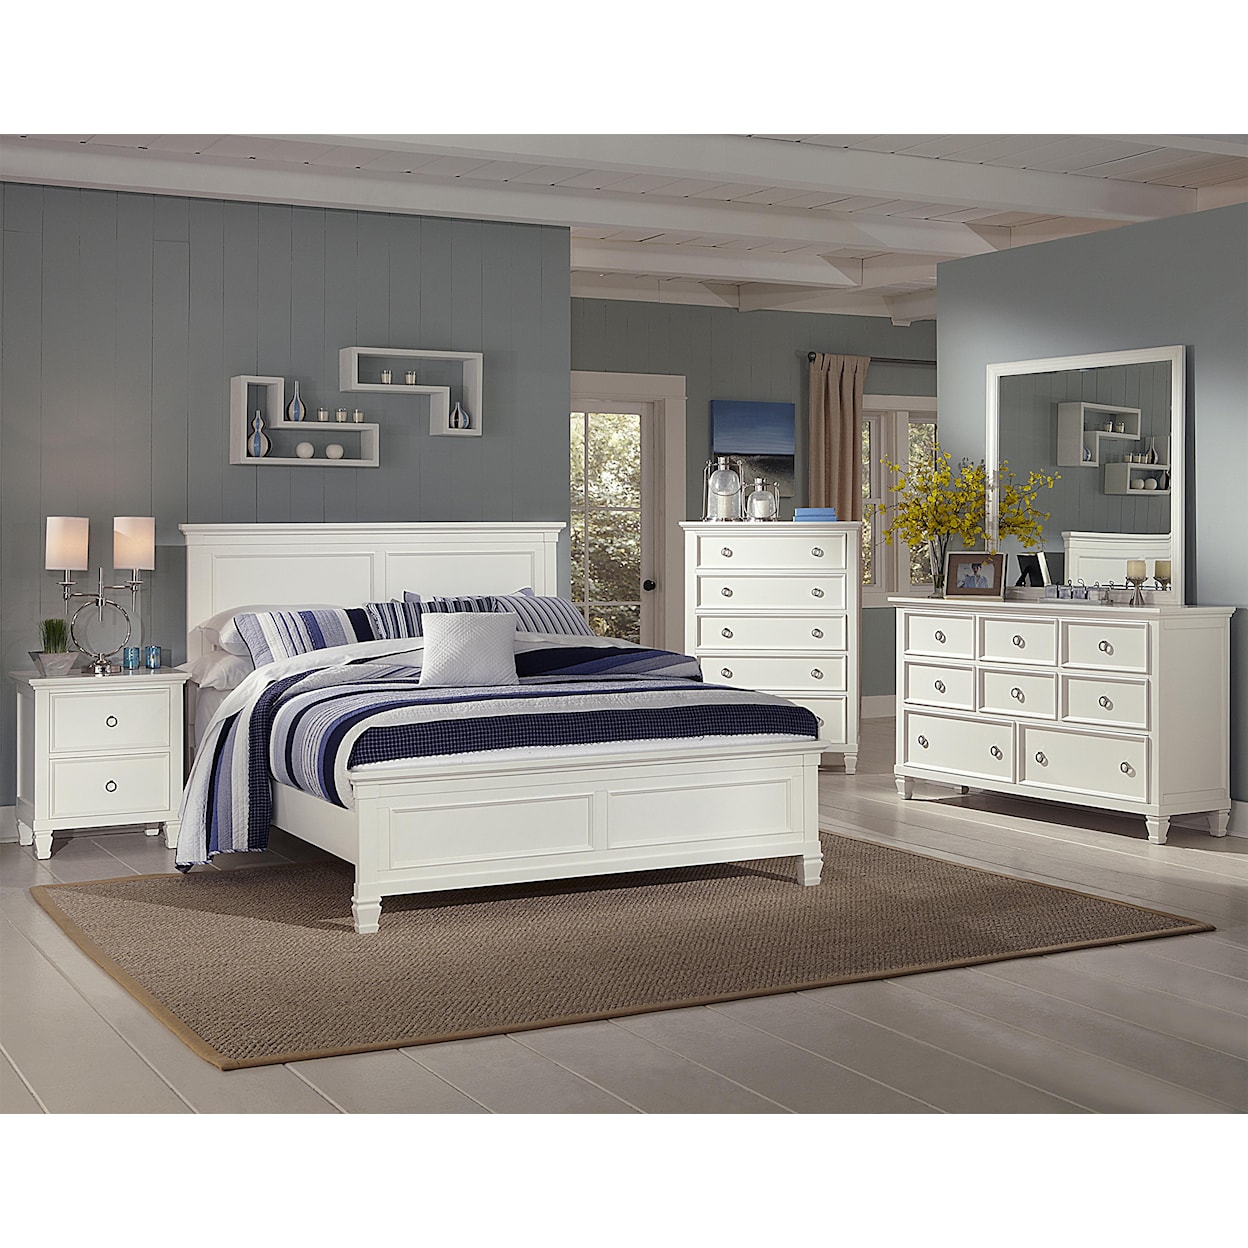 New Classic Countryside Full Bedroom Group